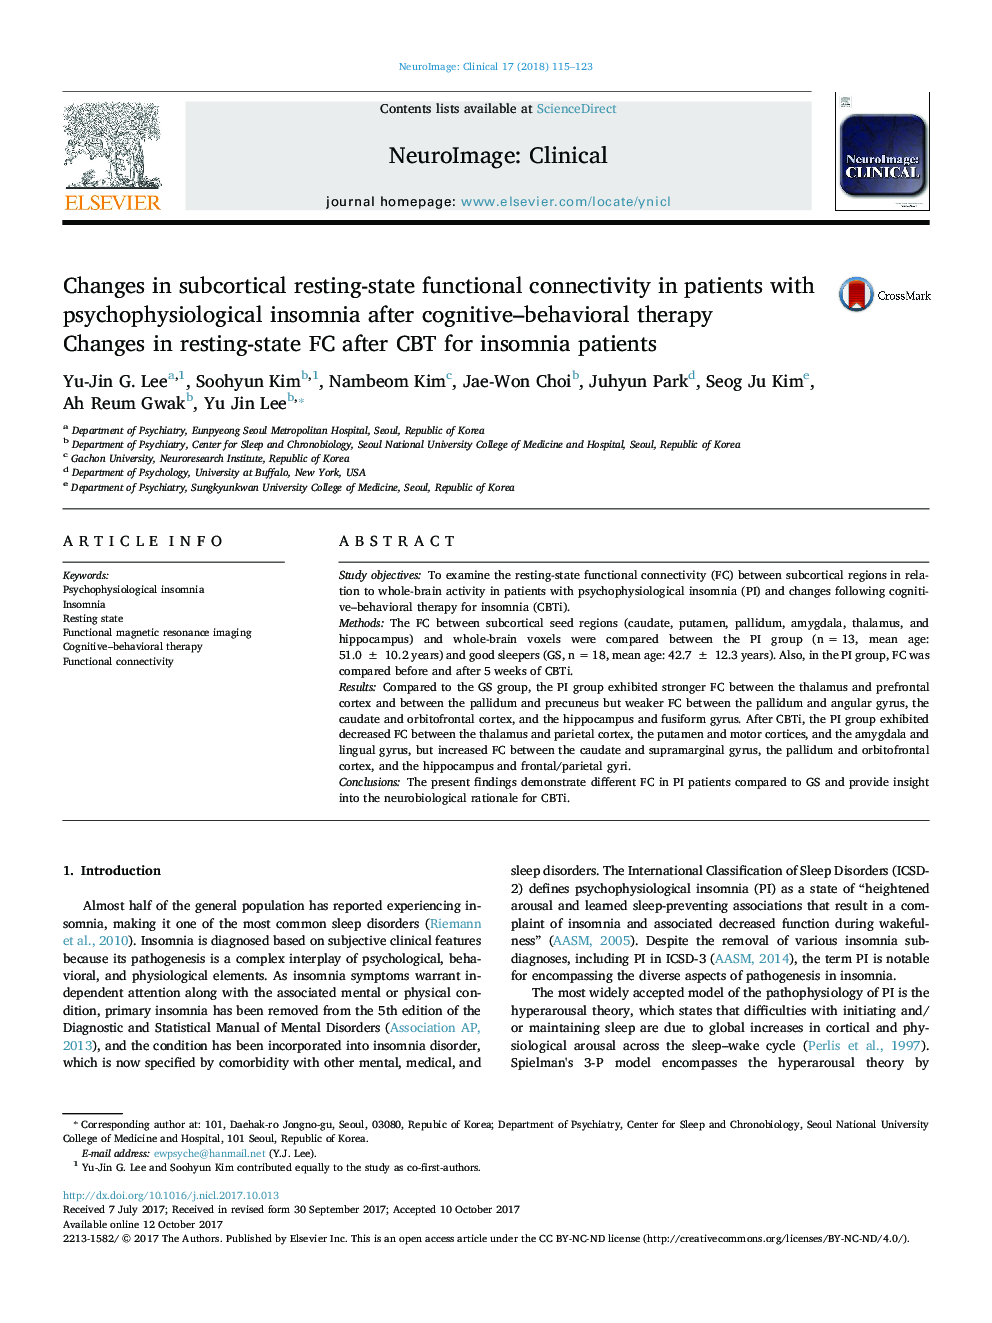 Changes in subcortical resting-state functional connectivity in patients with psychophysiological insomnia after cognitive-behavioral therapy